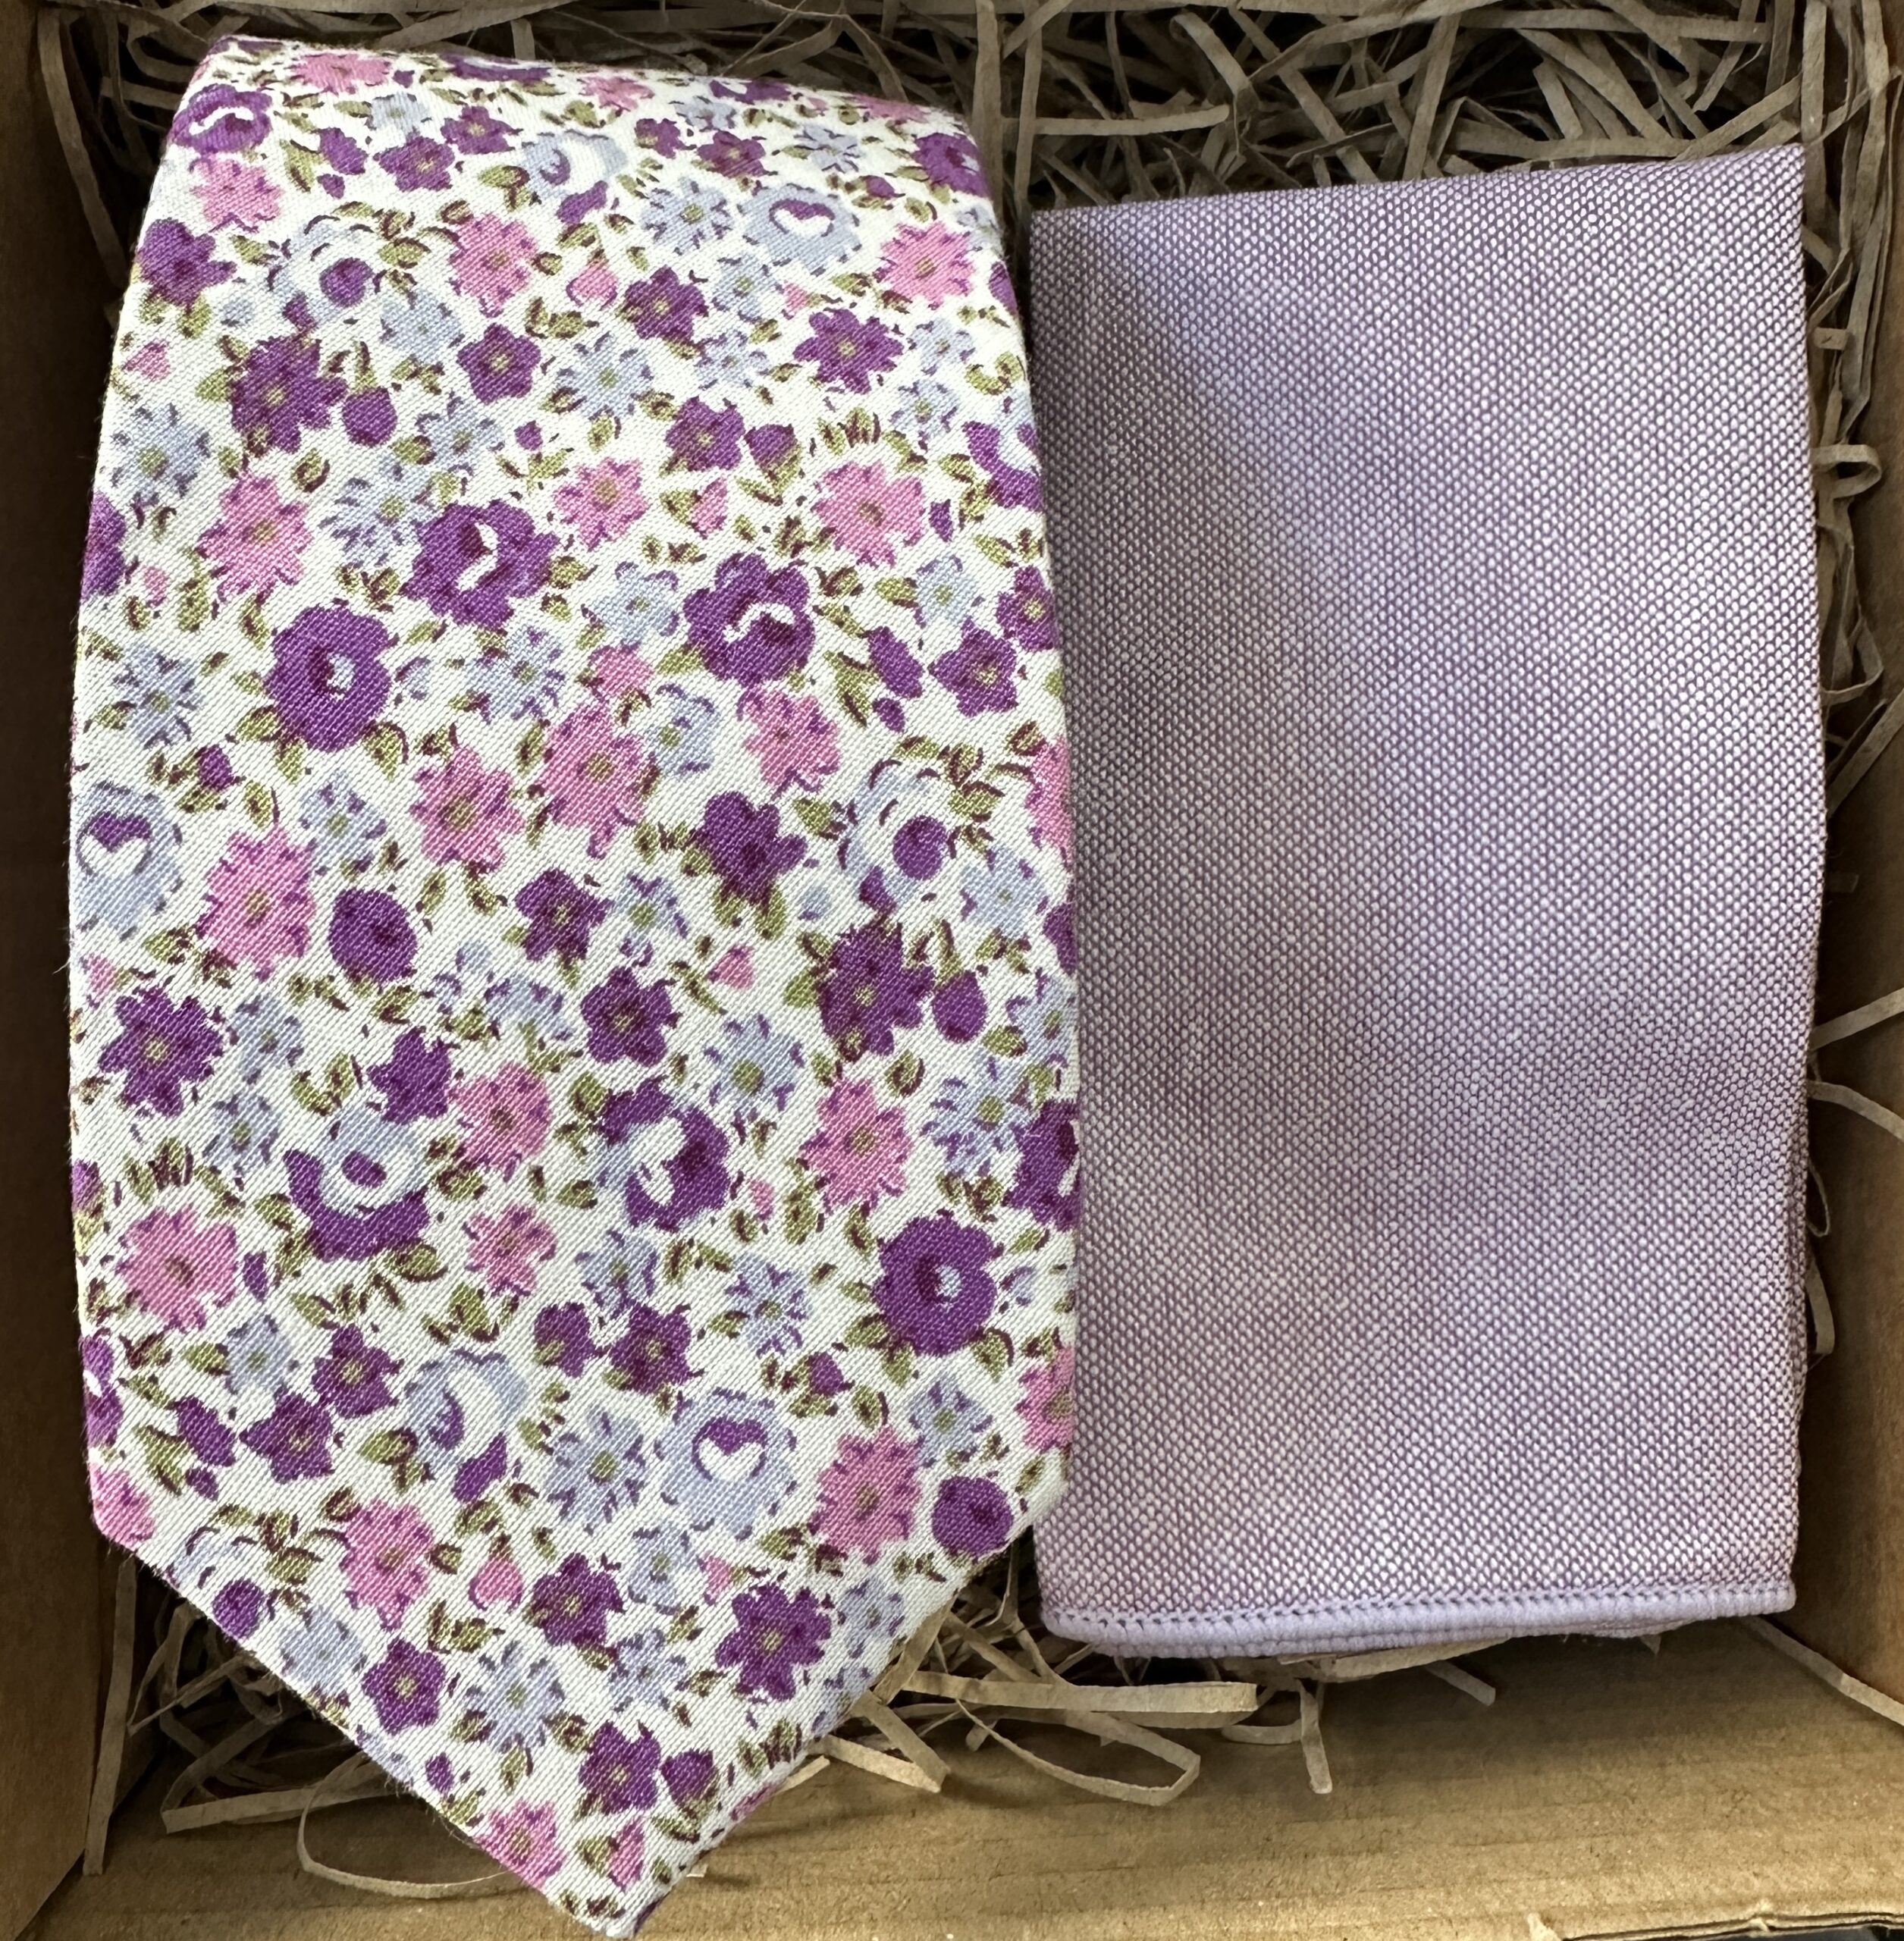 The Mulberry Tie, Bow Tie and Pocket Square Set